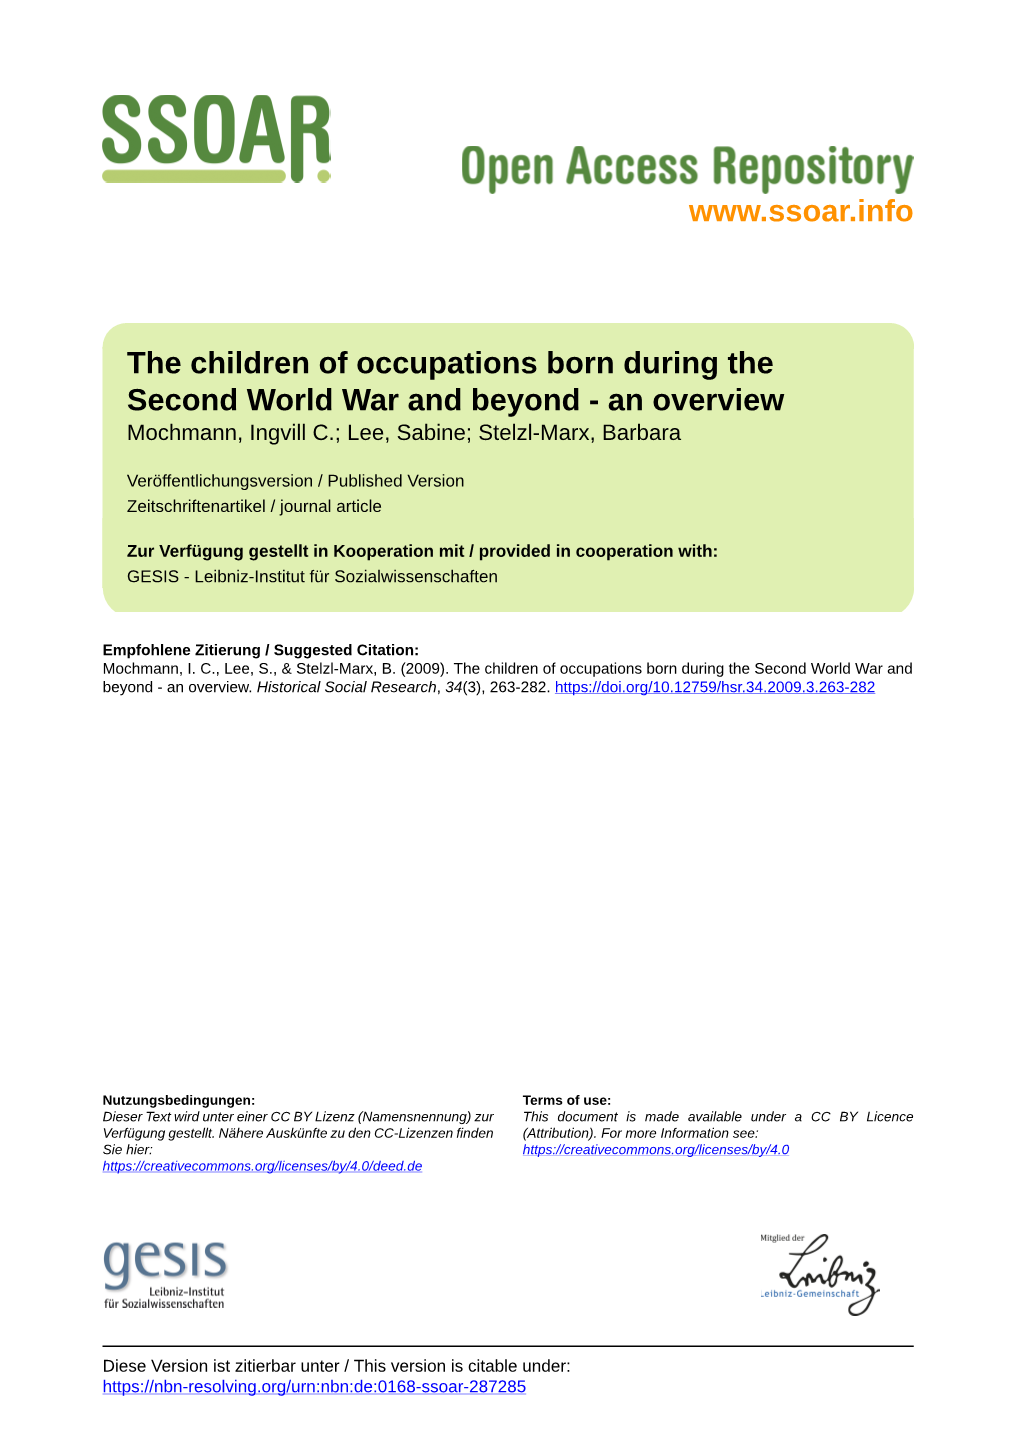 The Children of Occupations Born During the Second World War and Beyond - an Overview Mochmann, Ingvill C.; Lee, Sabine; Stelzl-Marx, Barbara